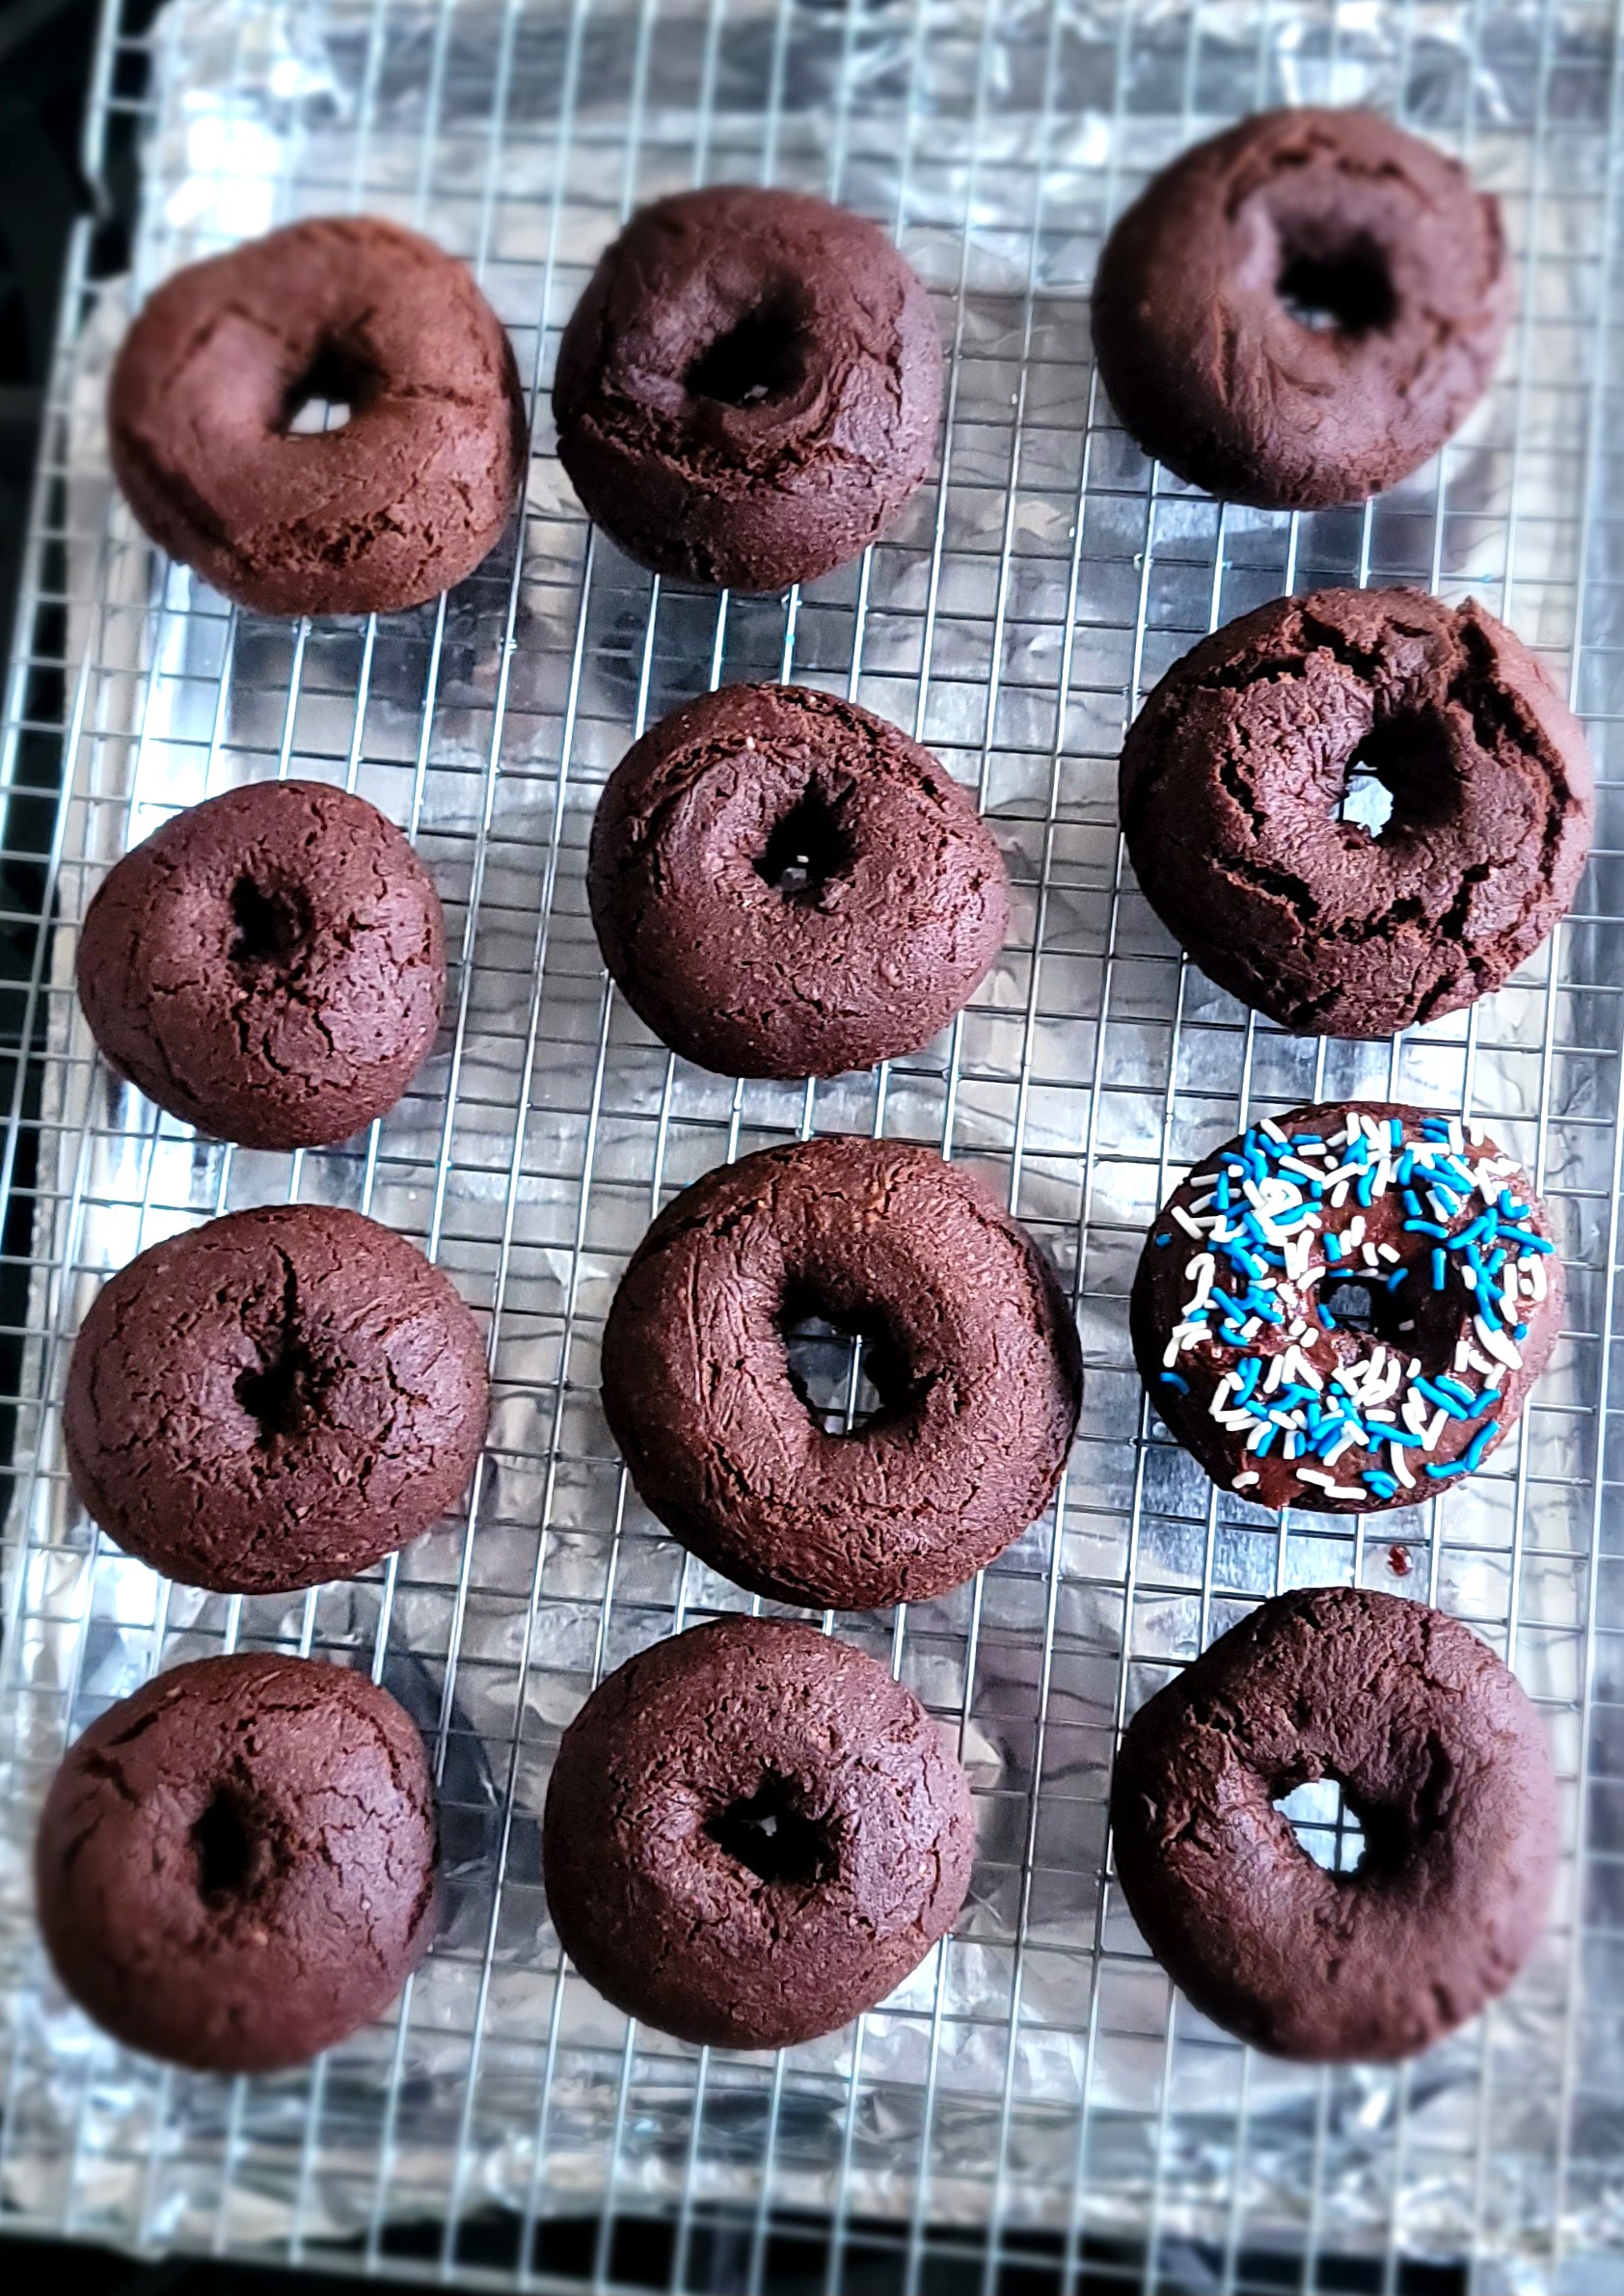 First Batch of Double Chocolate Gluten Free Donuts